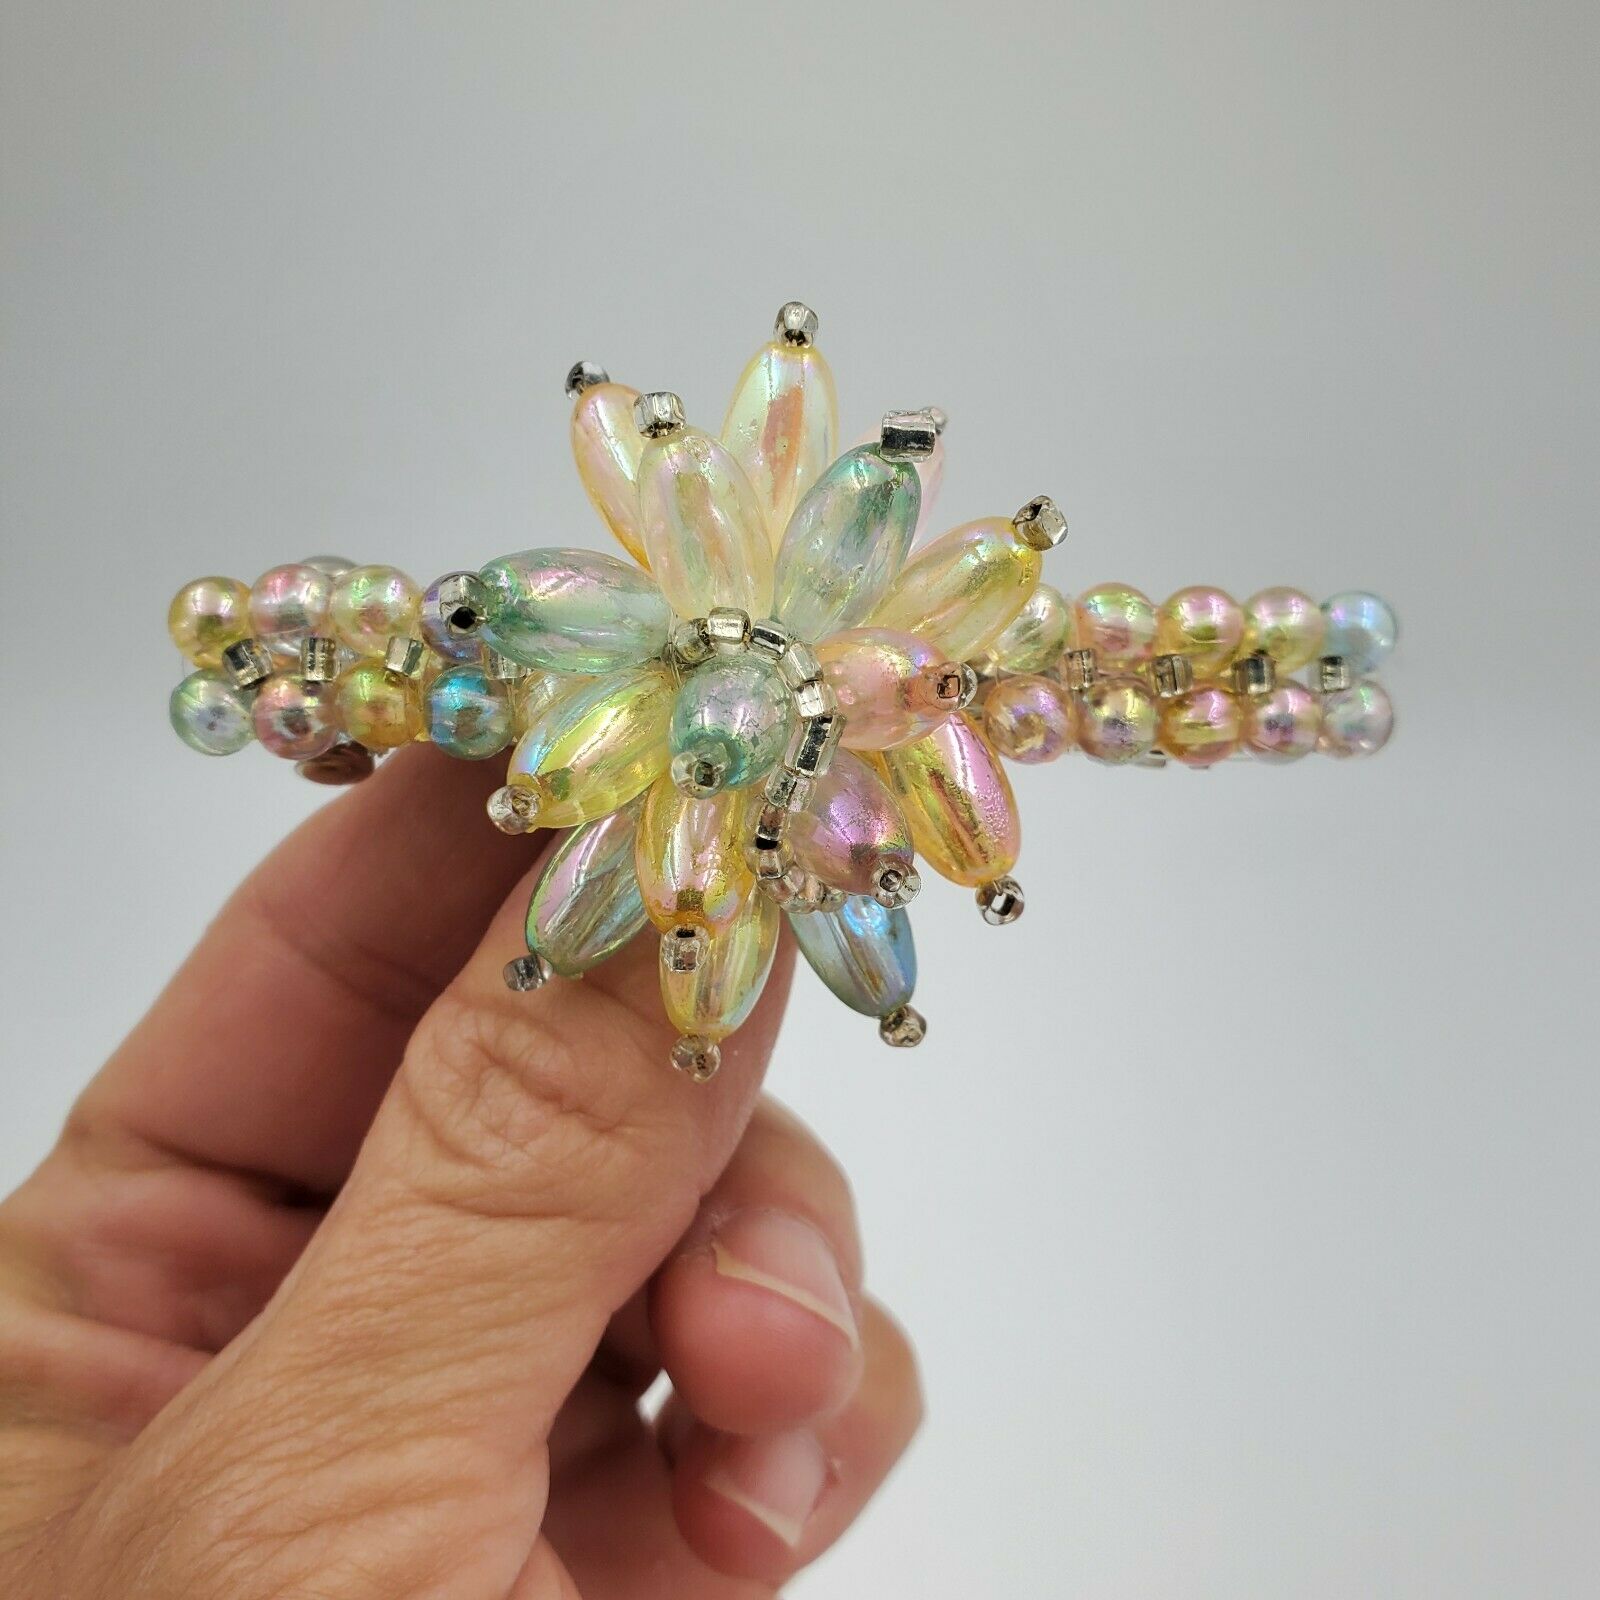 Vtg New Iridescent Multi-colored Silver Bead Flower Hair Barrette 80's Pink Blue